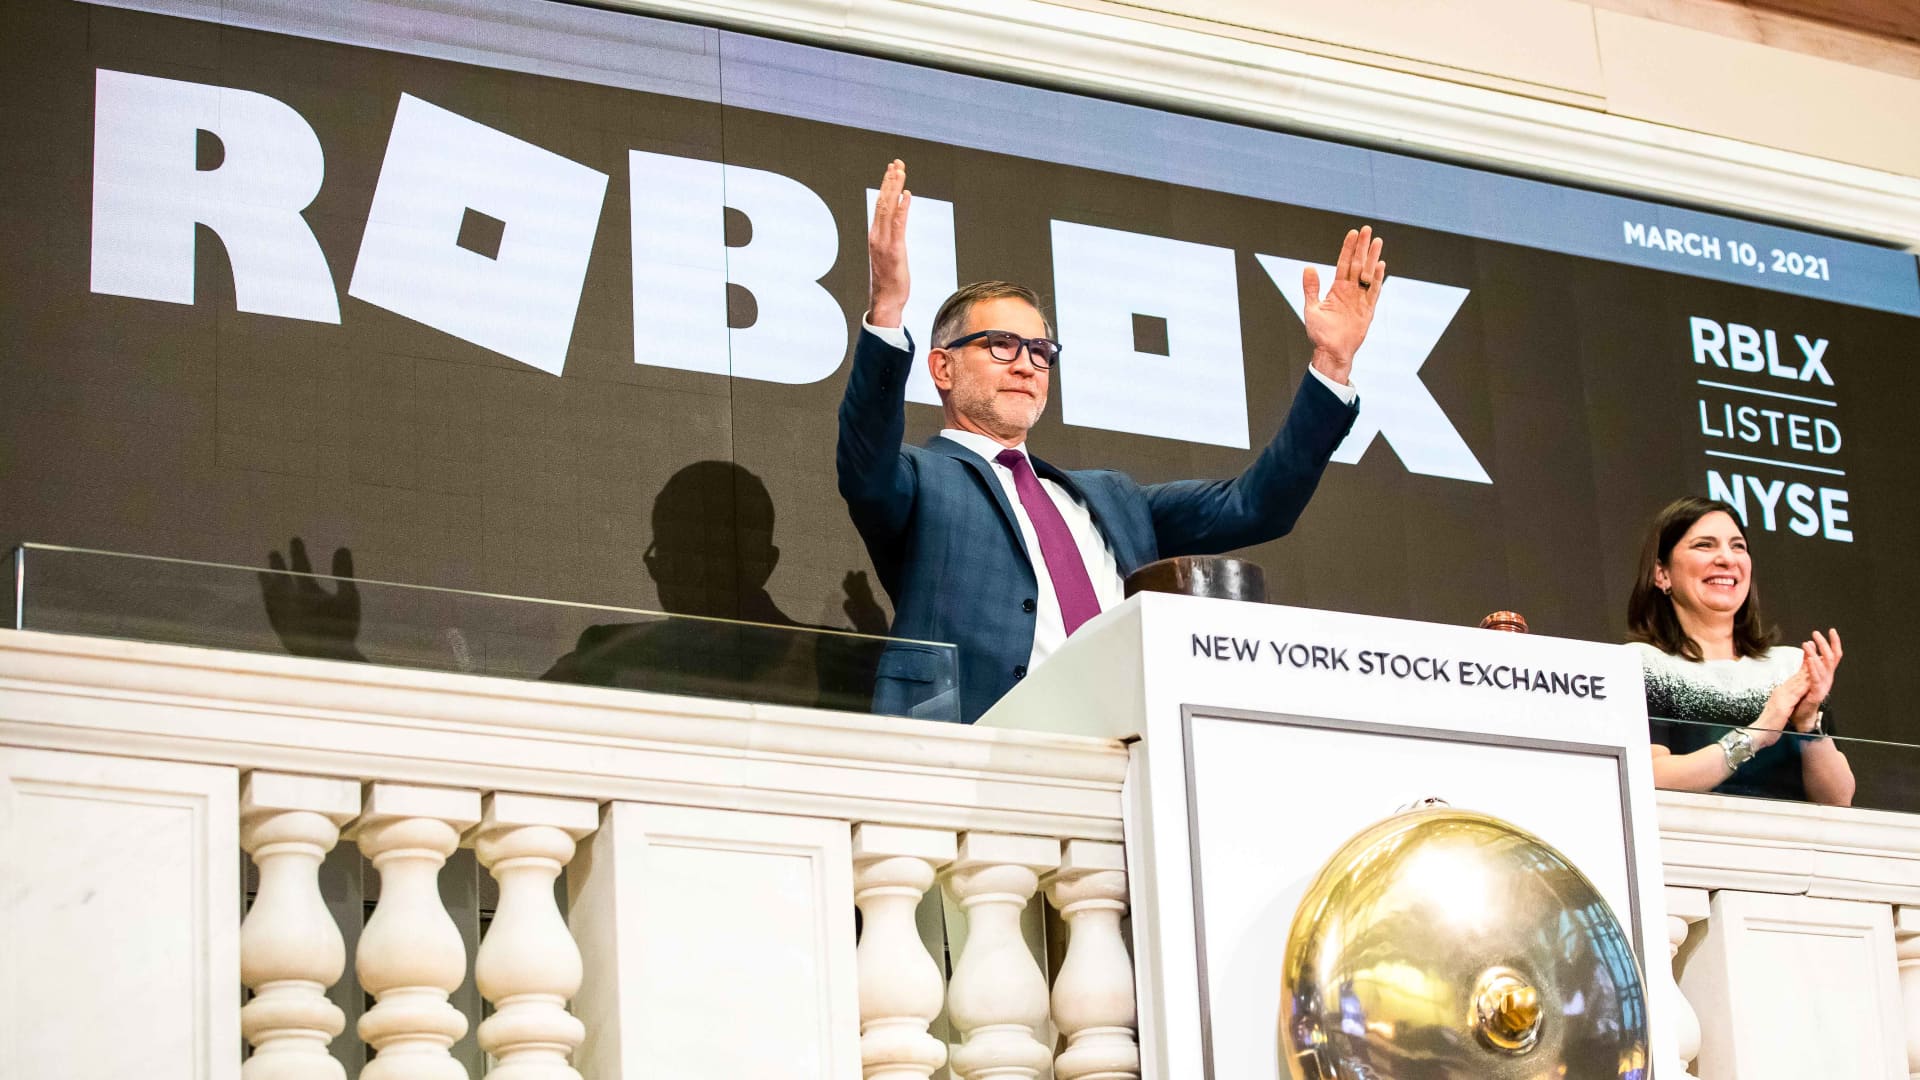 Roblox shares rise 12% after company beats estimates and issues strong guidance